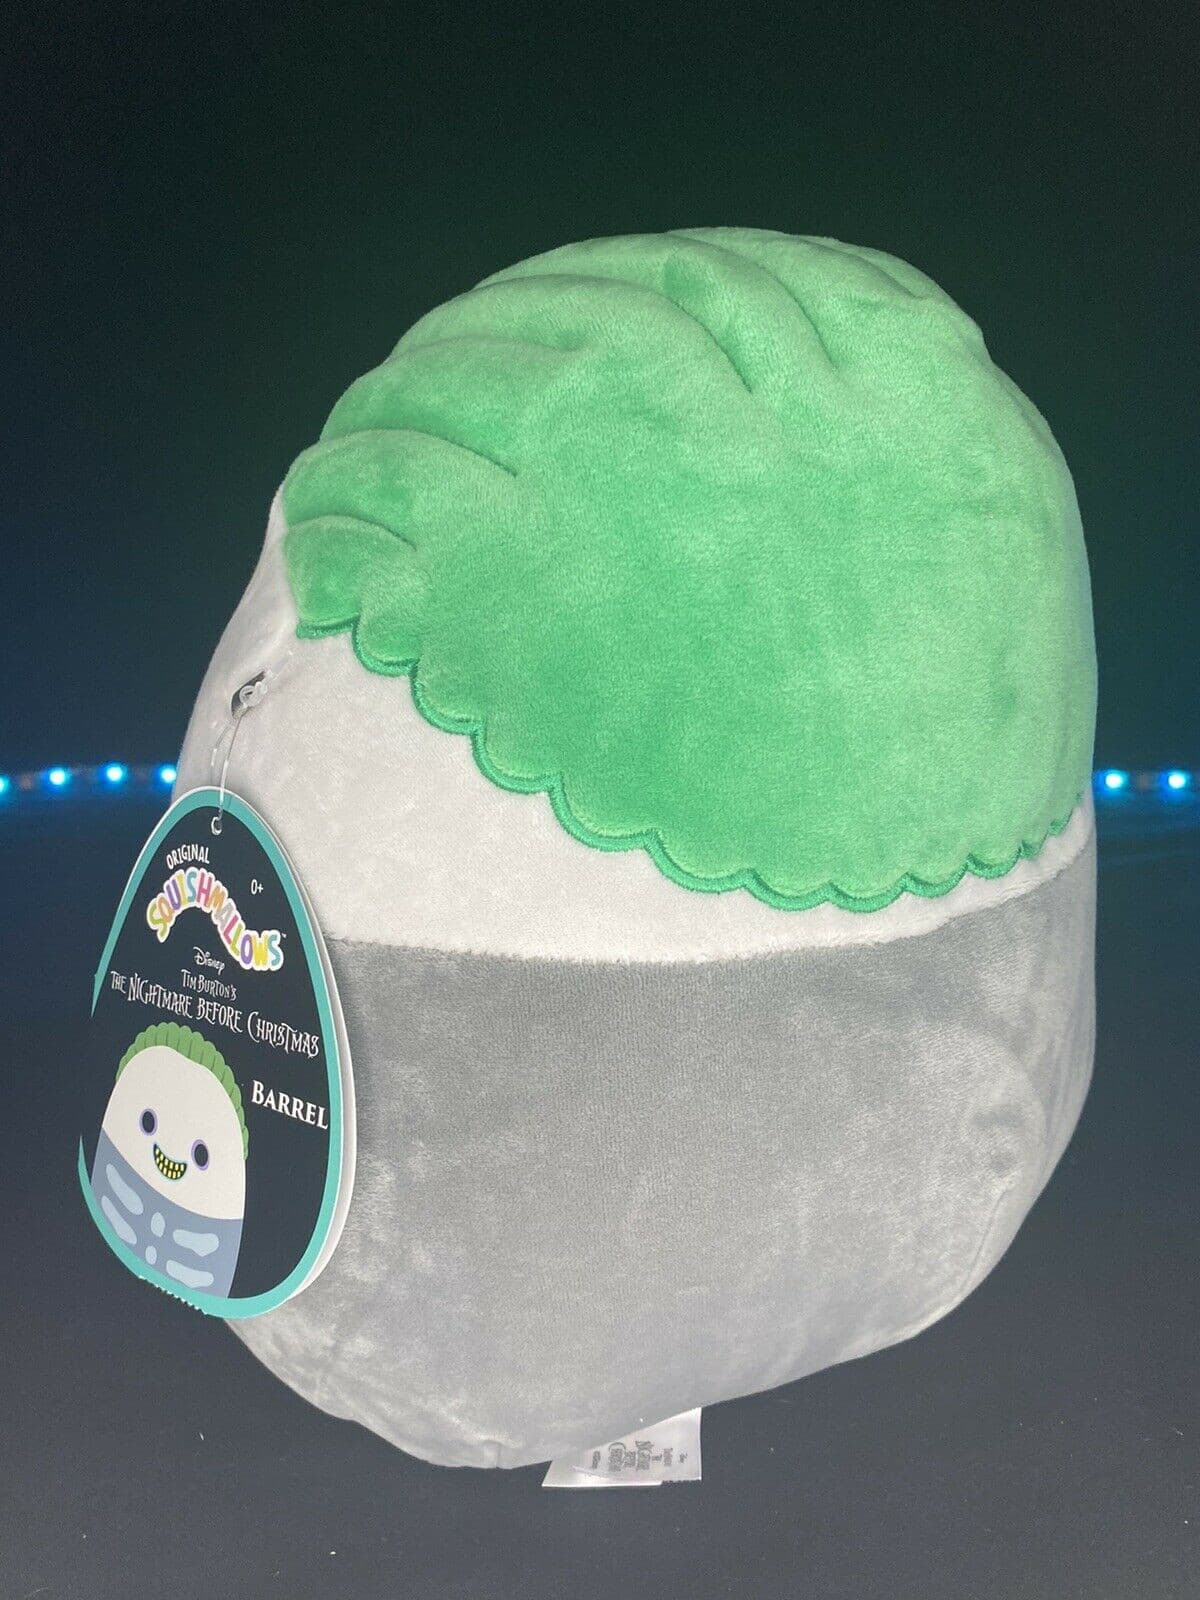 Squishmallow Nightmare Before Christmas 10” BARREL NWT 2021 HTF OOGIE BOOGIE BOY | Sweet Magnolia Charms.